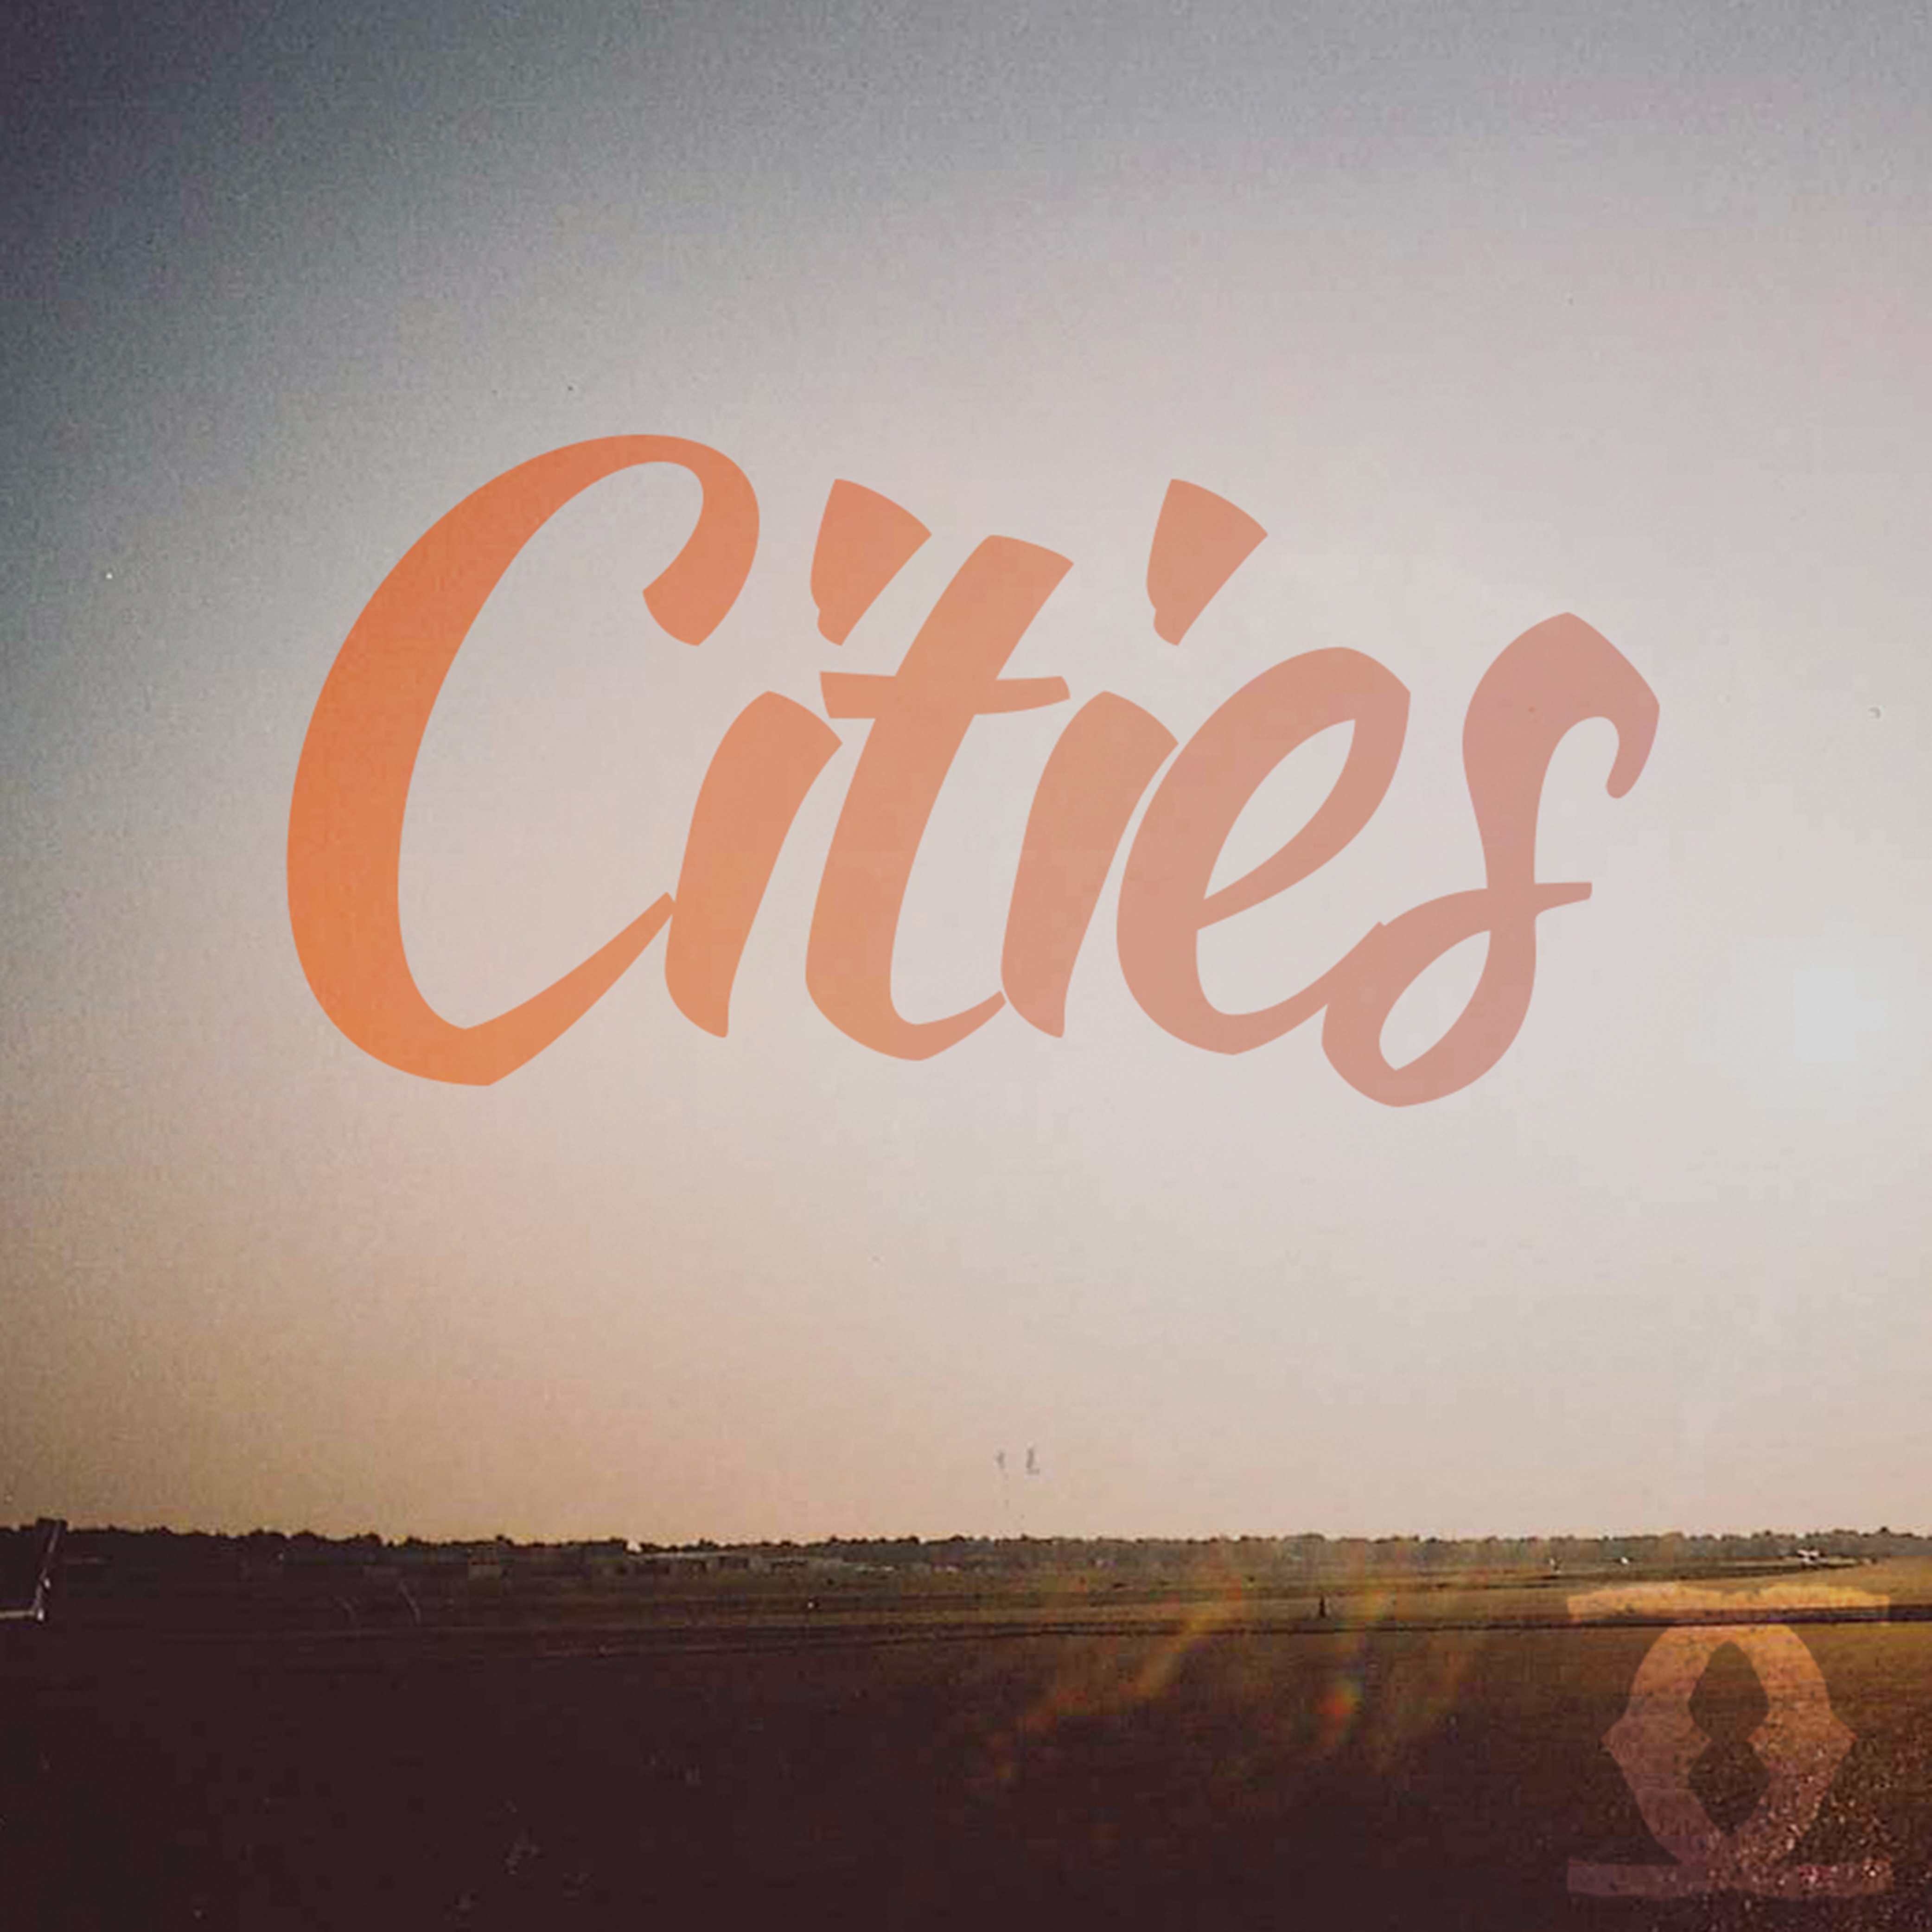 CITIES - Self Titled EP